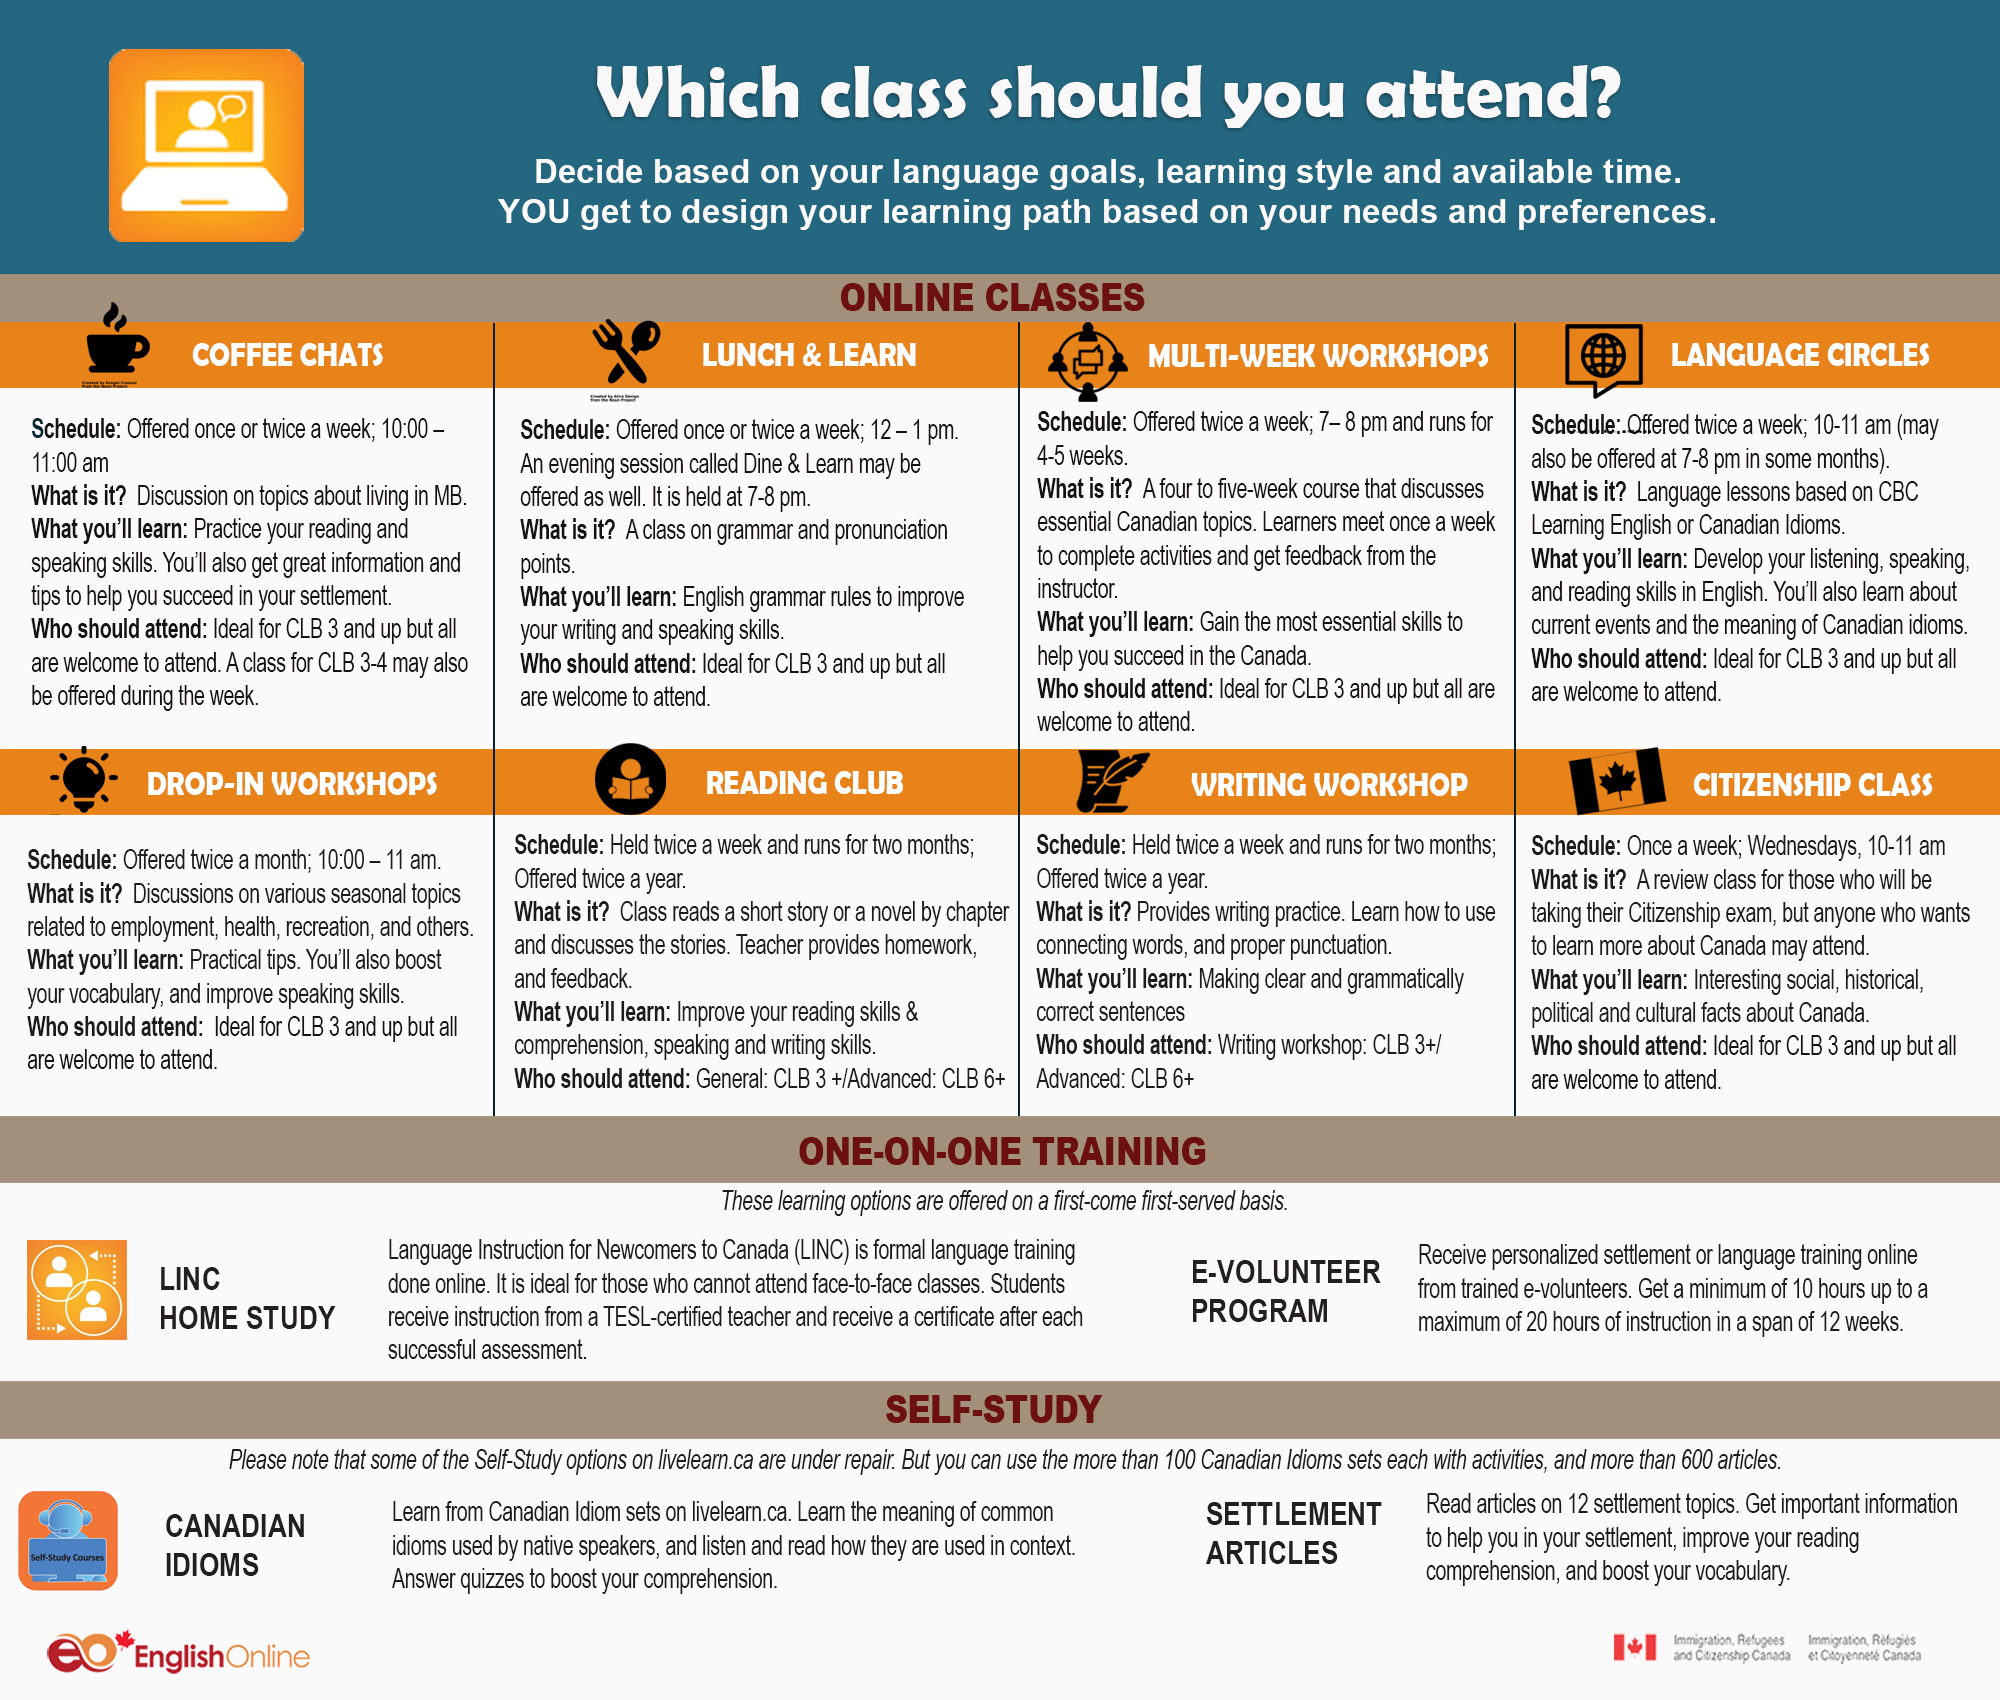 "Which class do I attend" poster